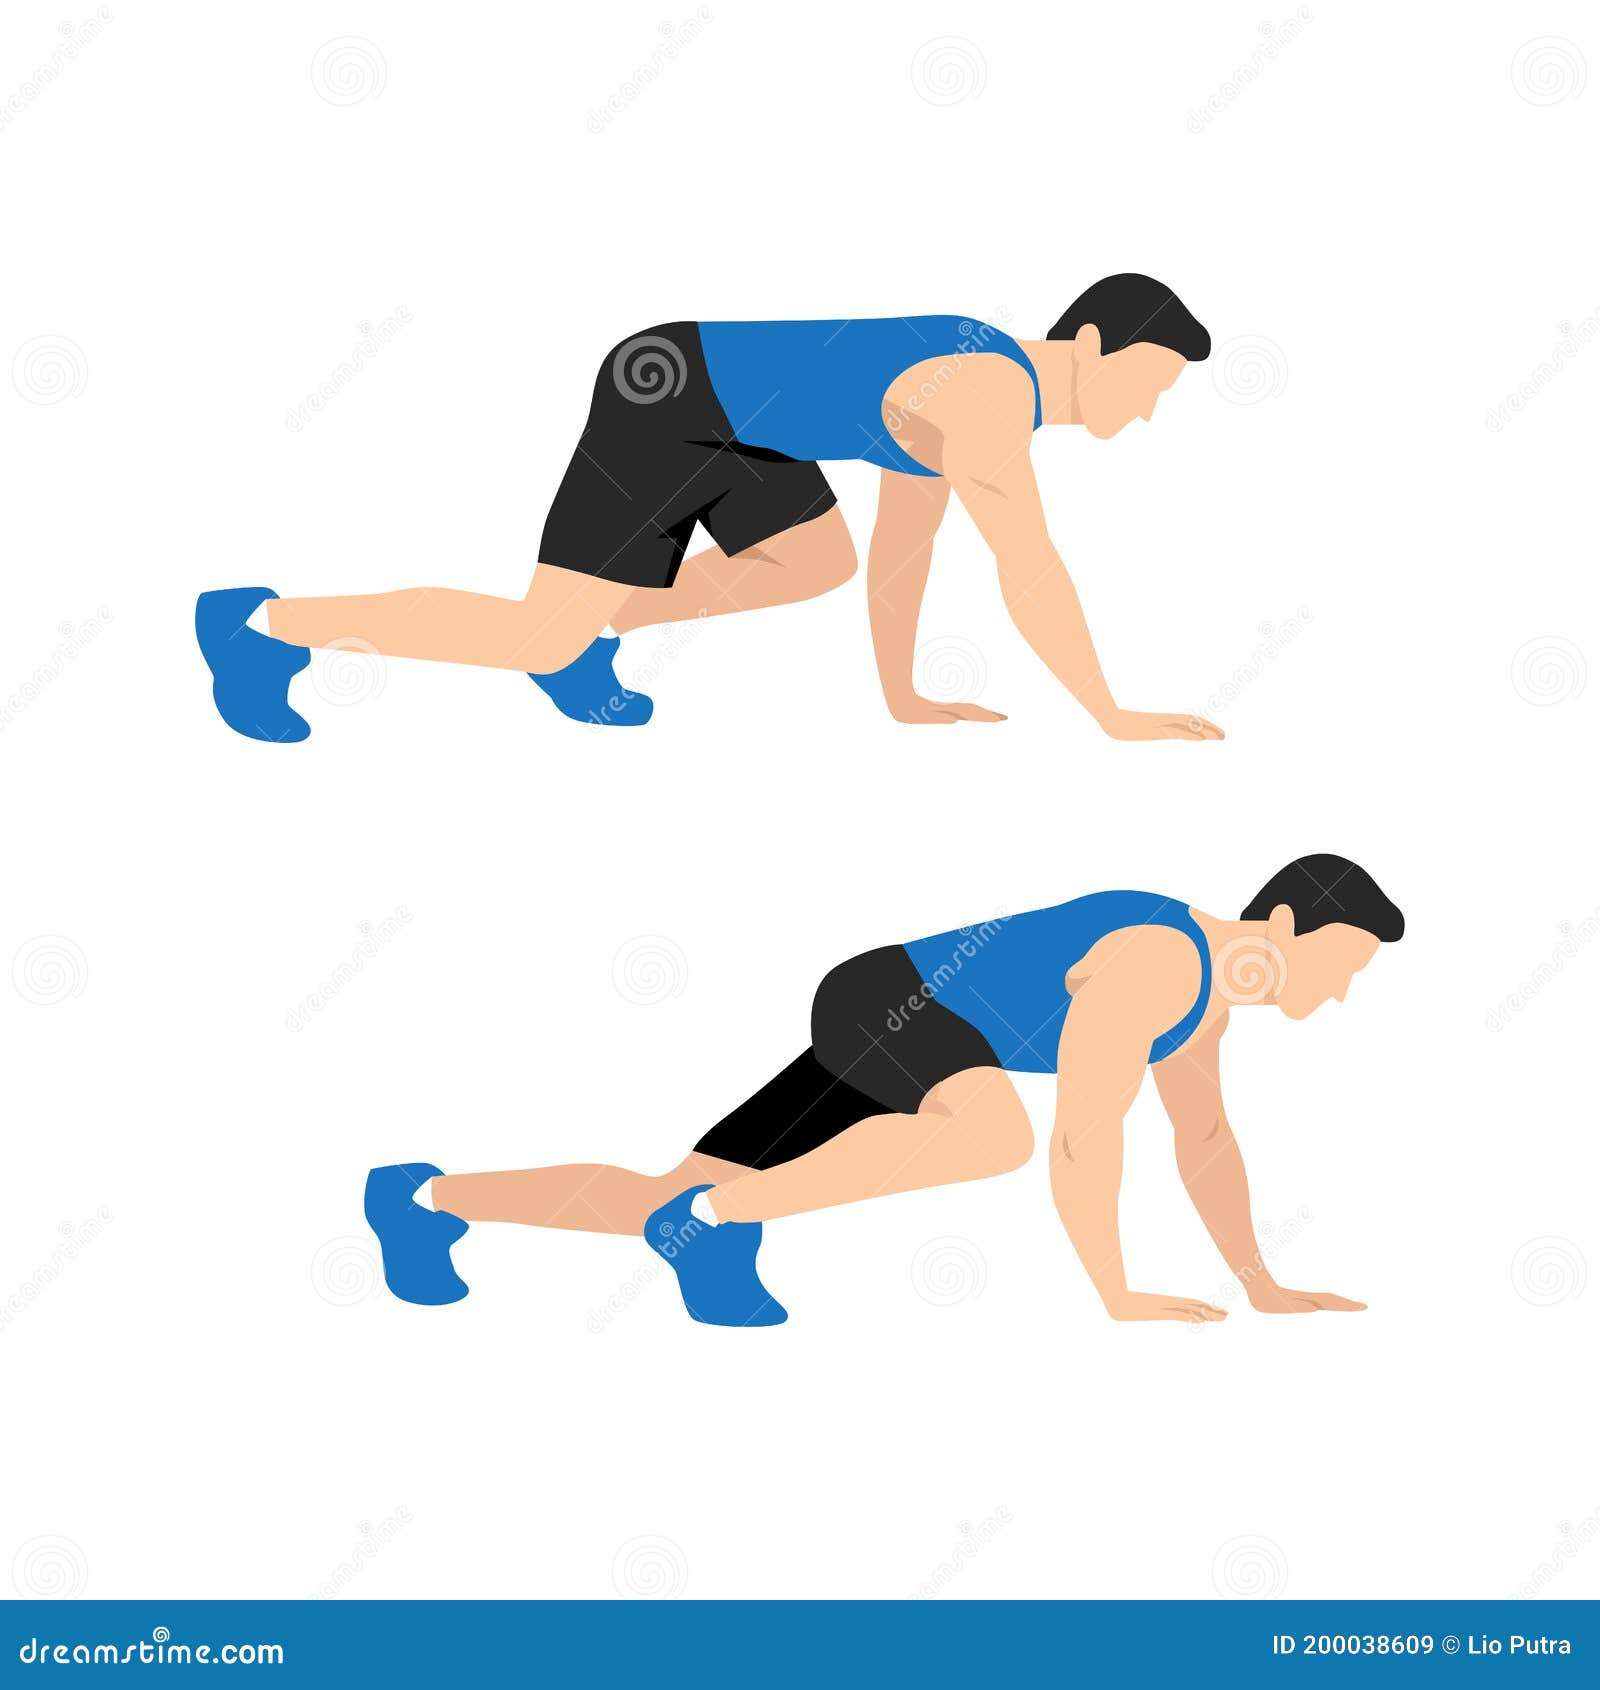 bear crawl exercise introduction step with healthy man